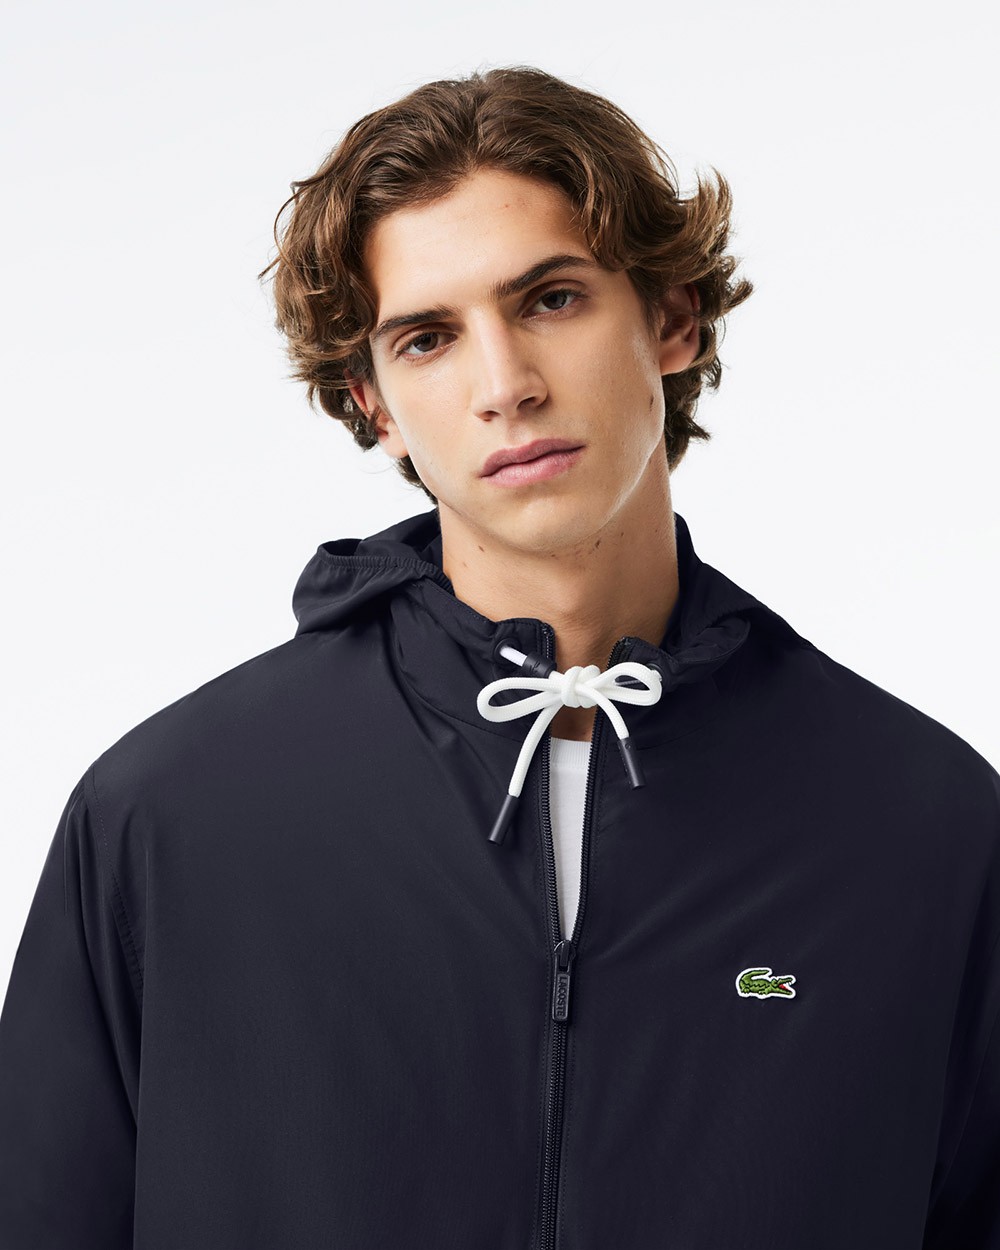 LACOSTE BH1679-00 - Jacket